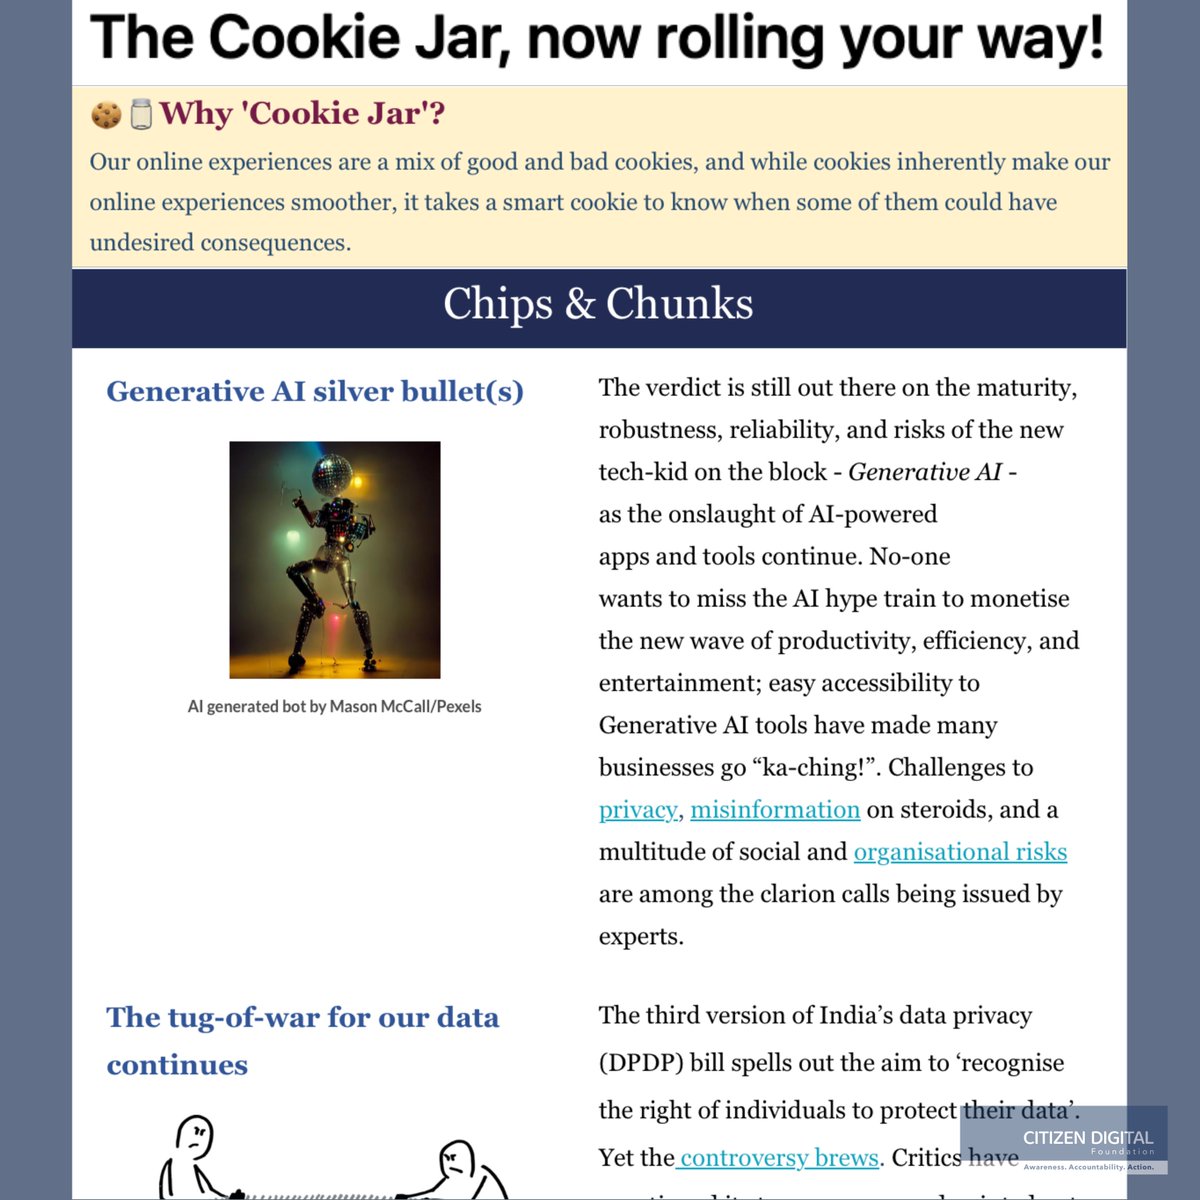 📢Hurrah! We just rolled out The Cookie Jar - our crackling new newsletter.🎉
Use it to be that cool cookie that questions and reads the fine-print.

Sign up and stay tuned, using this link: tinyurl.com/ykwzdzuu

#MonthlyNewsletter #responsibleinnovation #TechUpdates